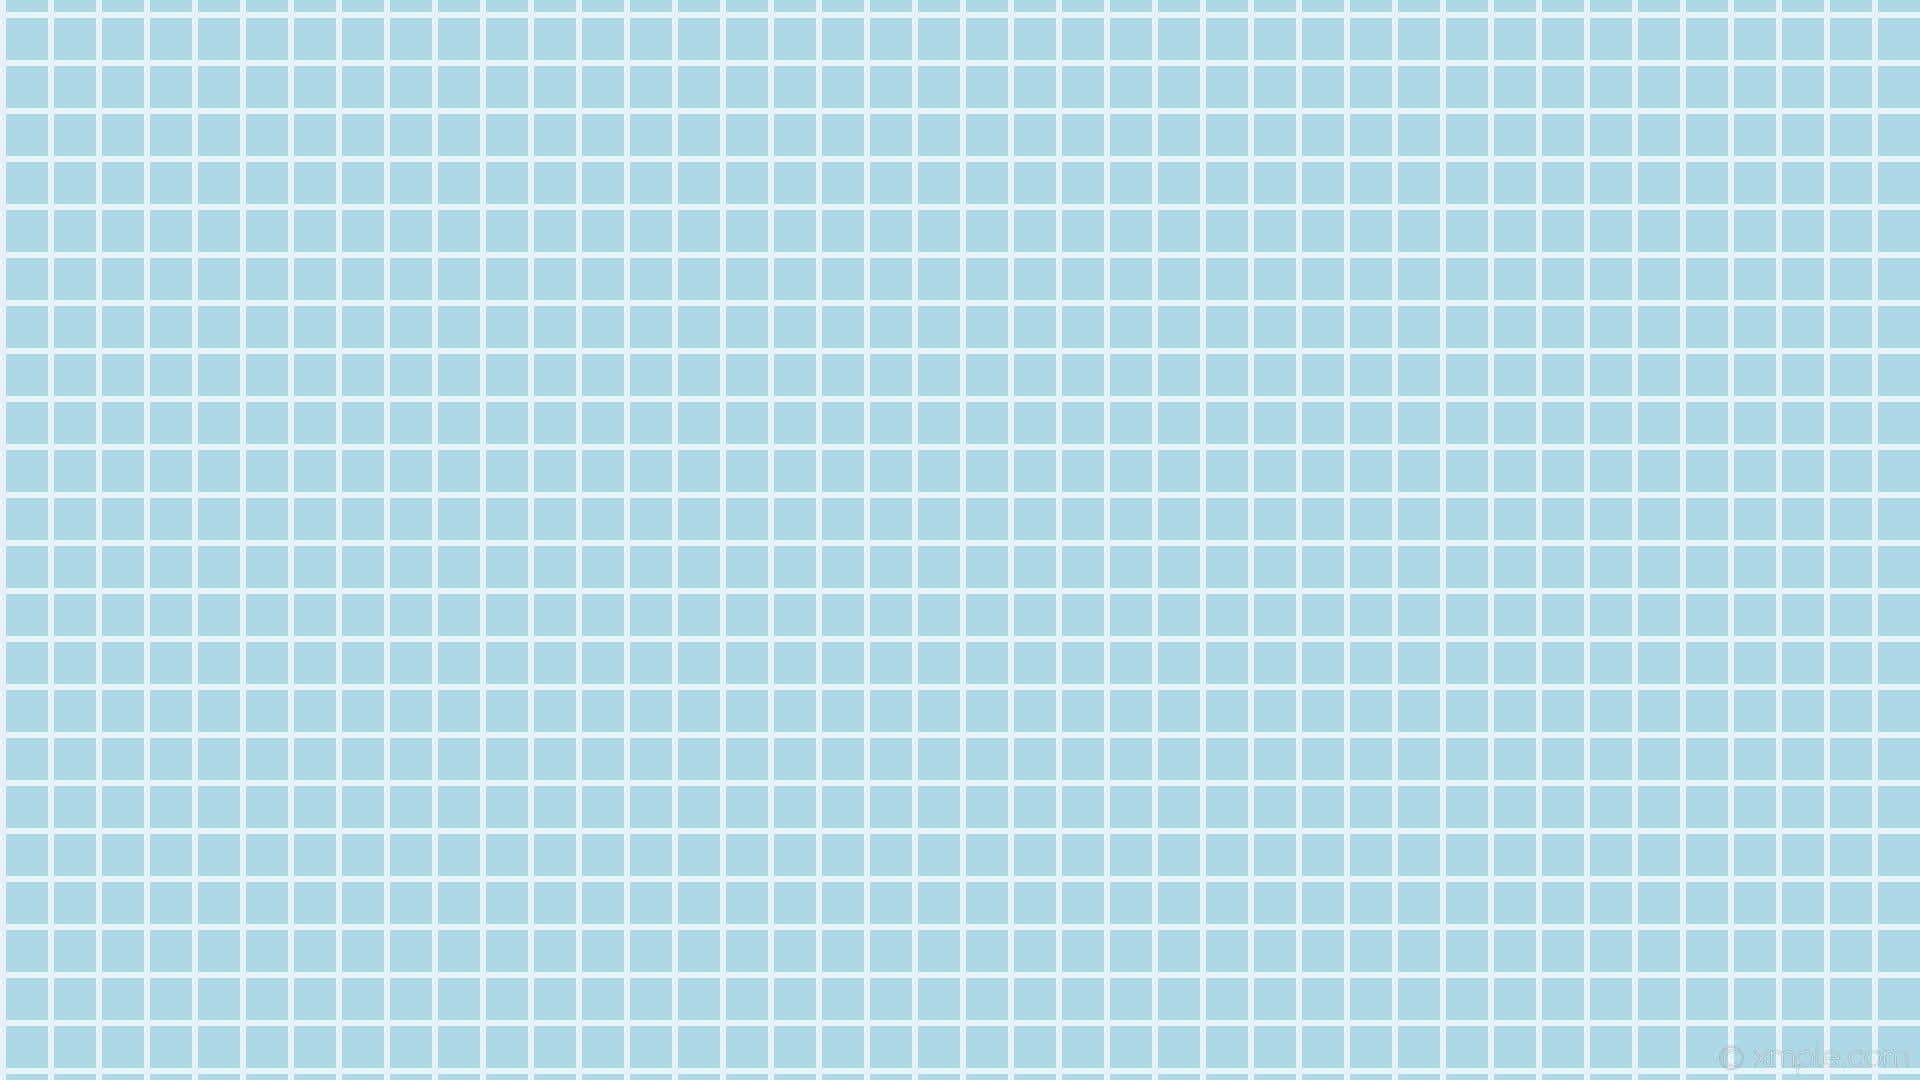 Brighten up your workspace with this light blue aesthetic laptop Wallpaper